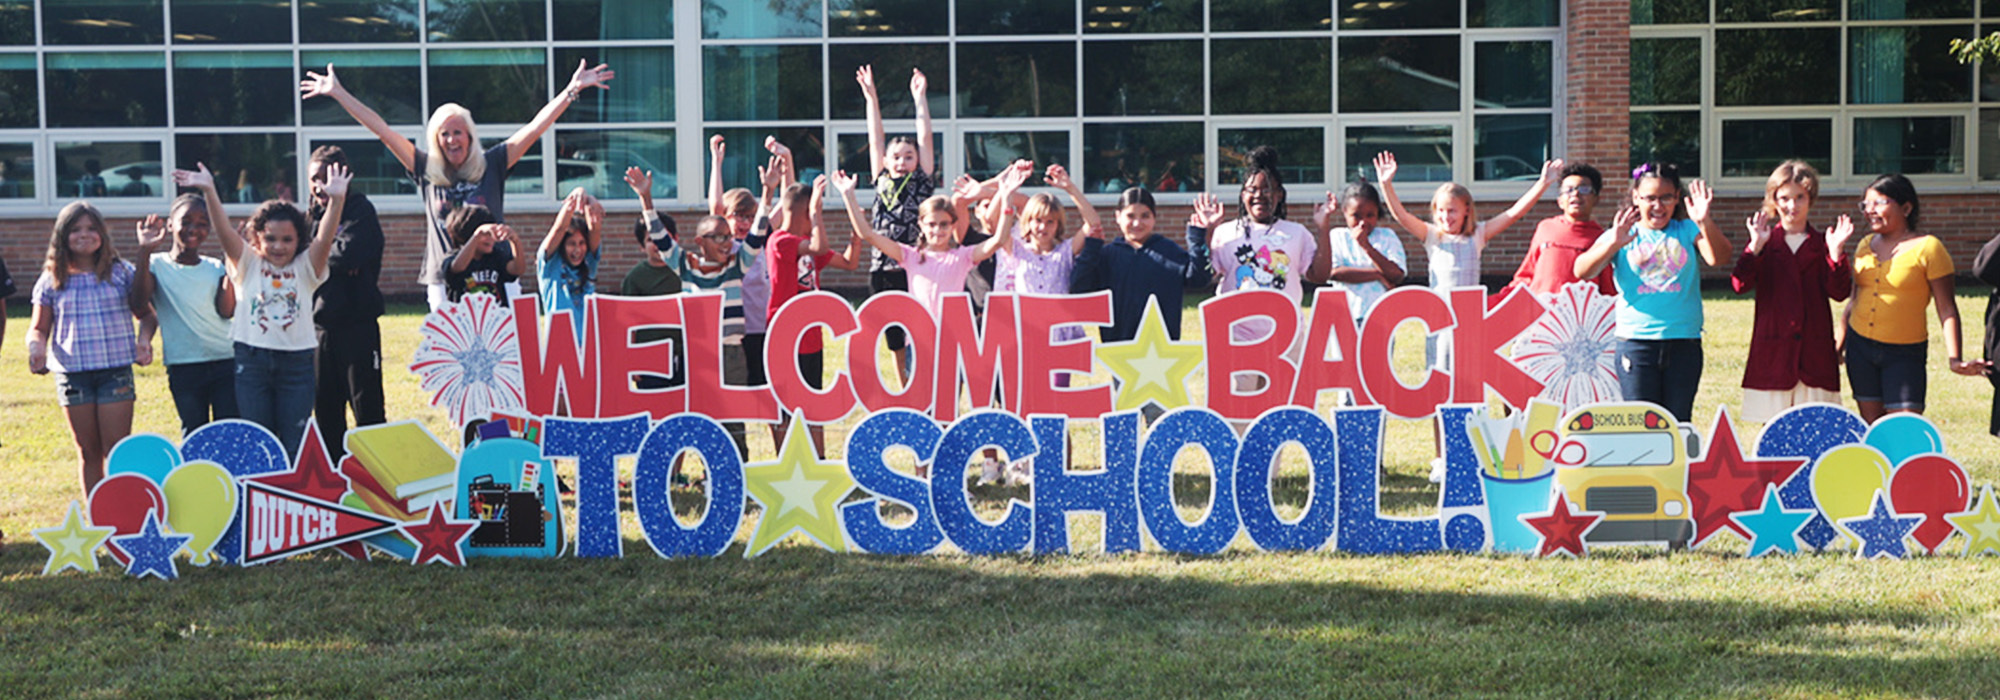 Students by Welcome back to School sign